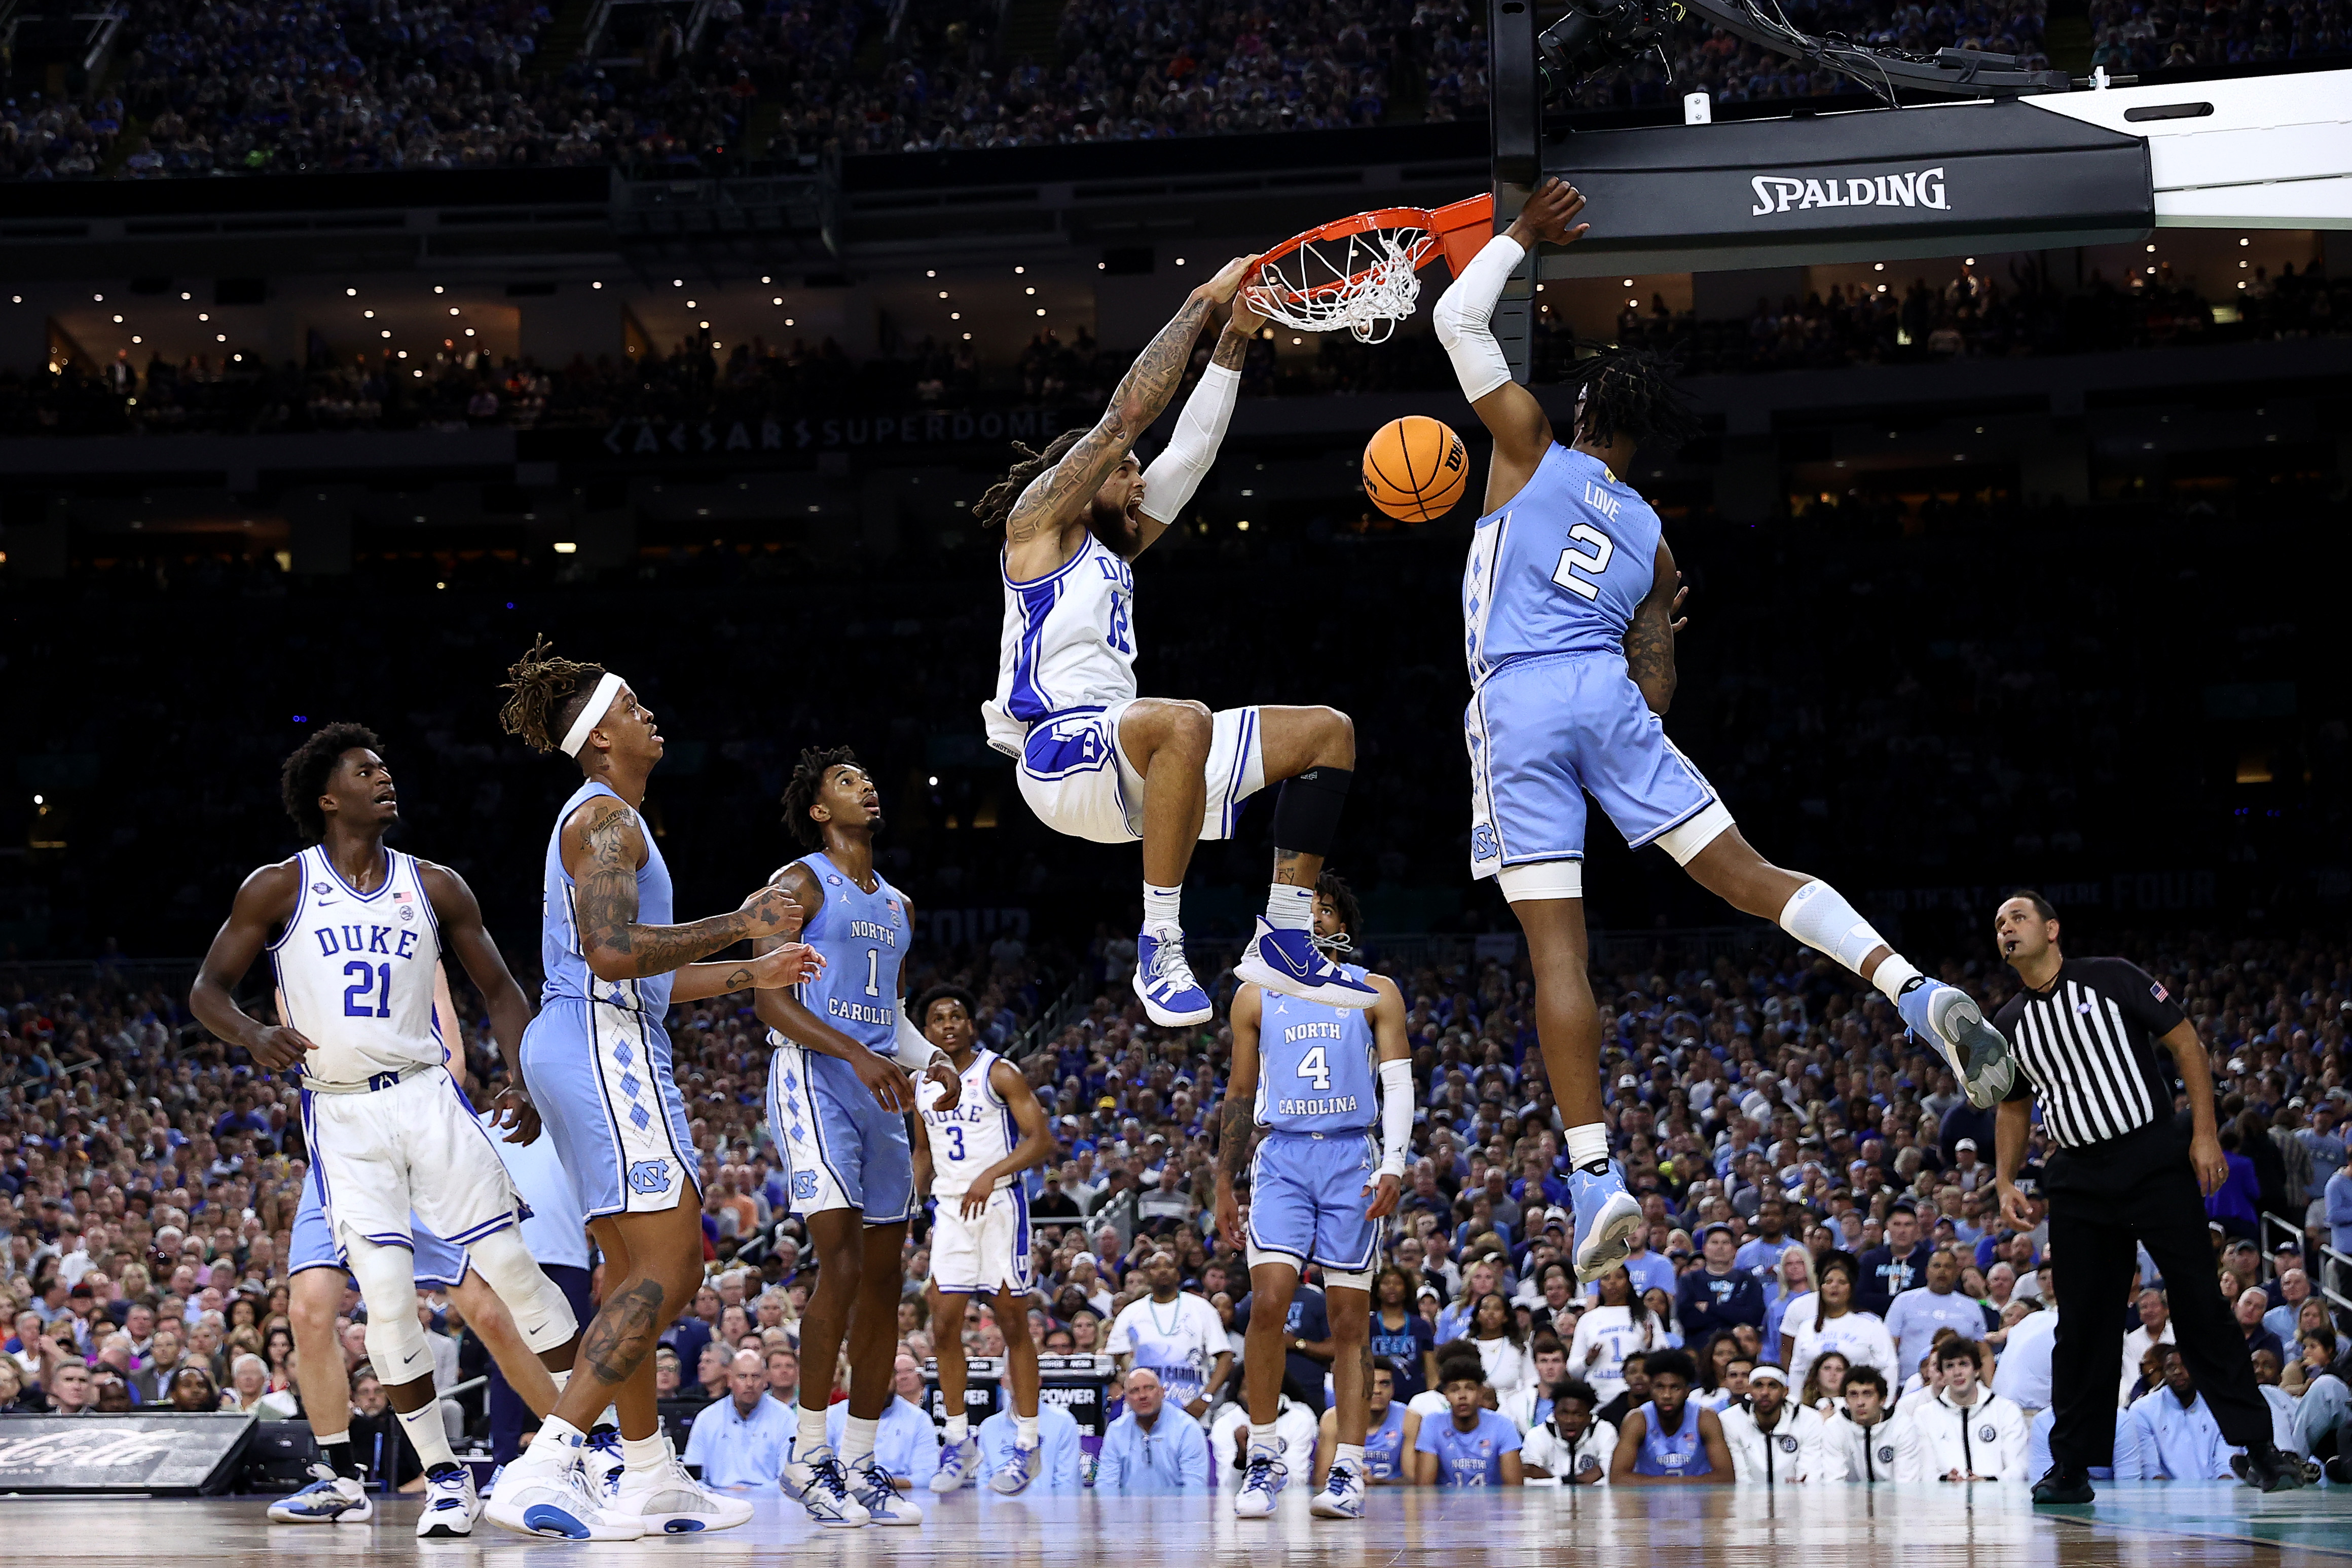 most iconic sports photo from March Madness and Getty Image